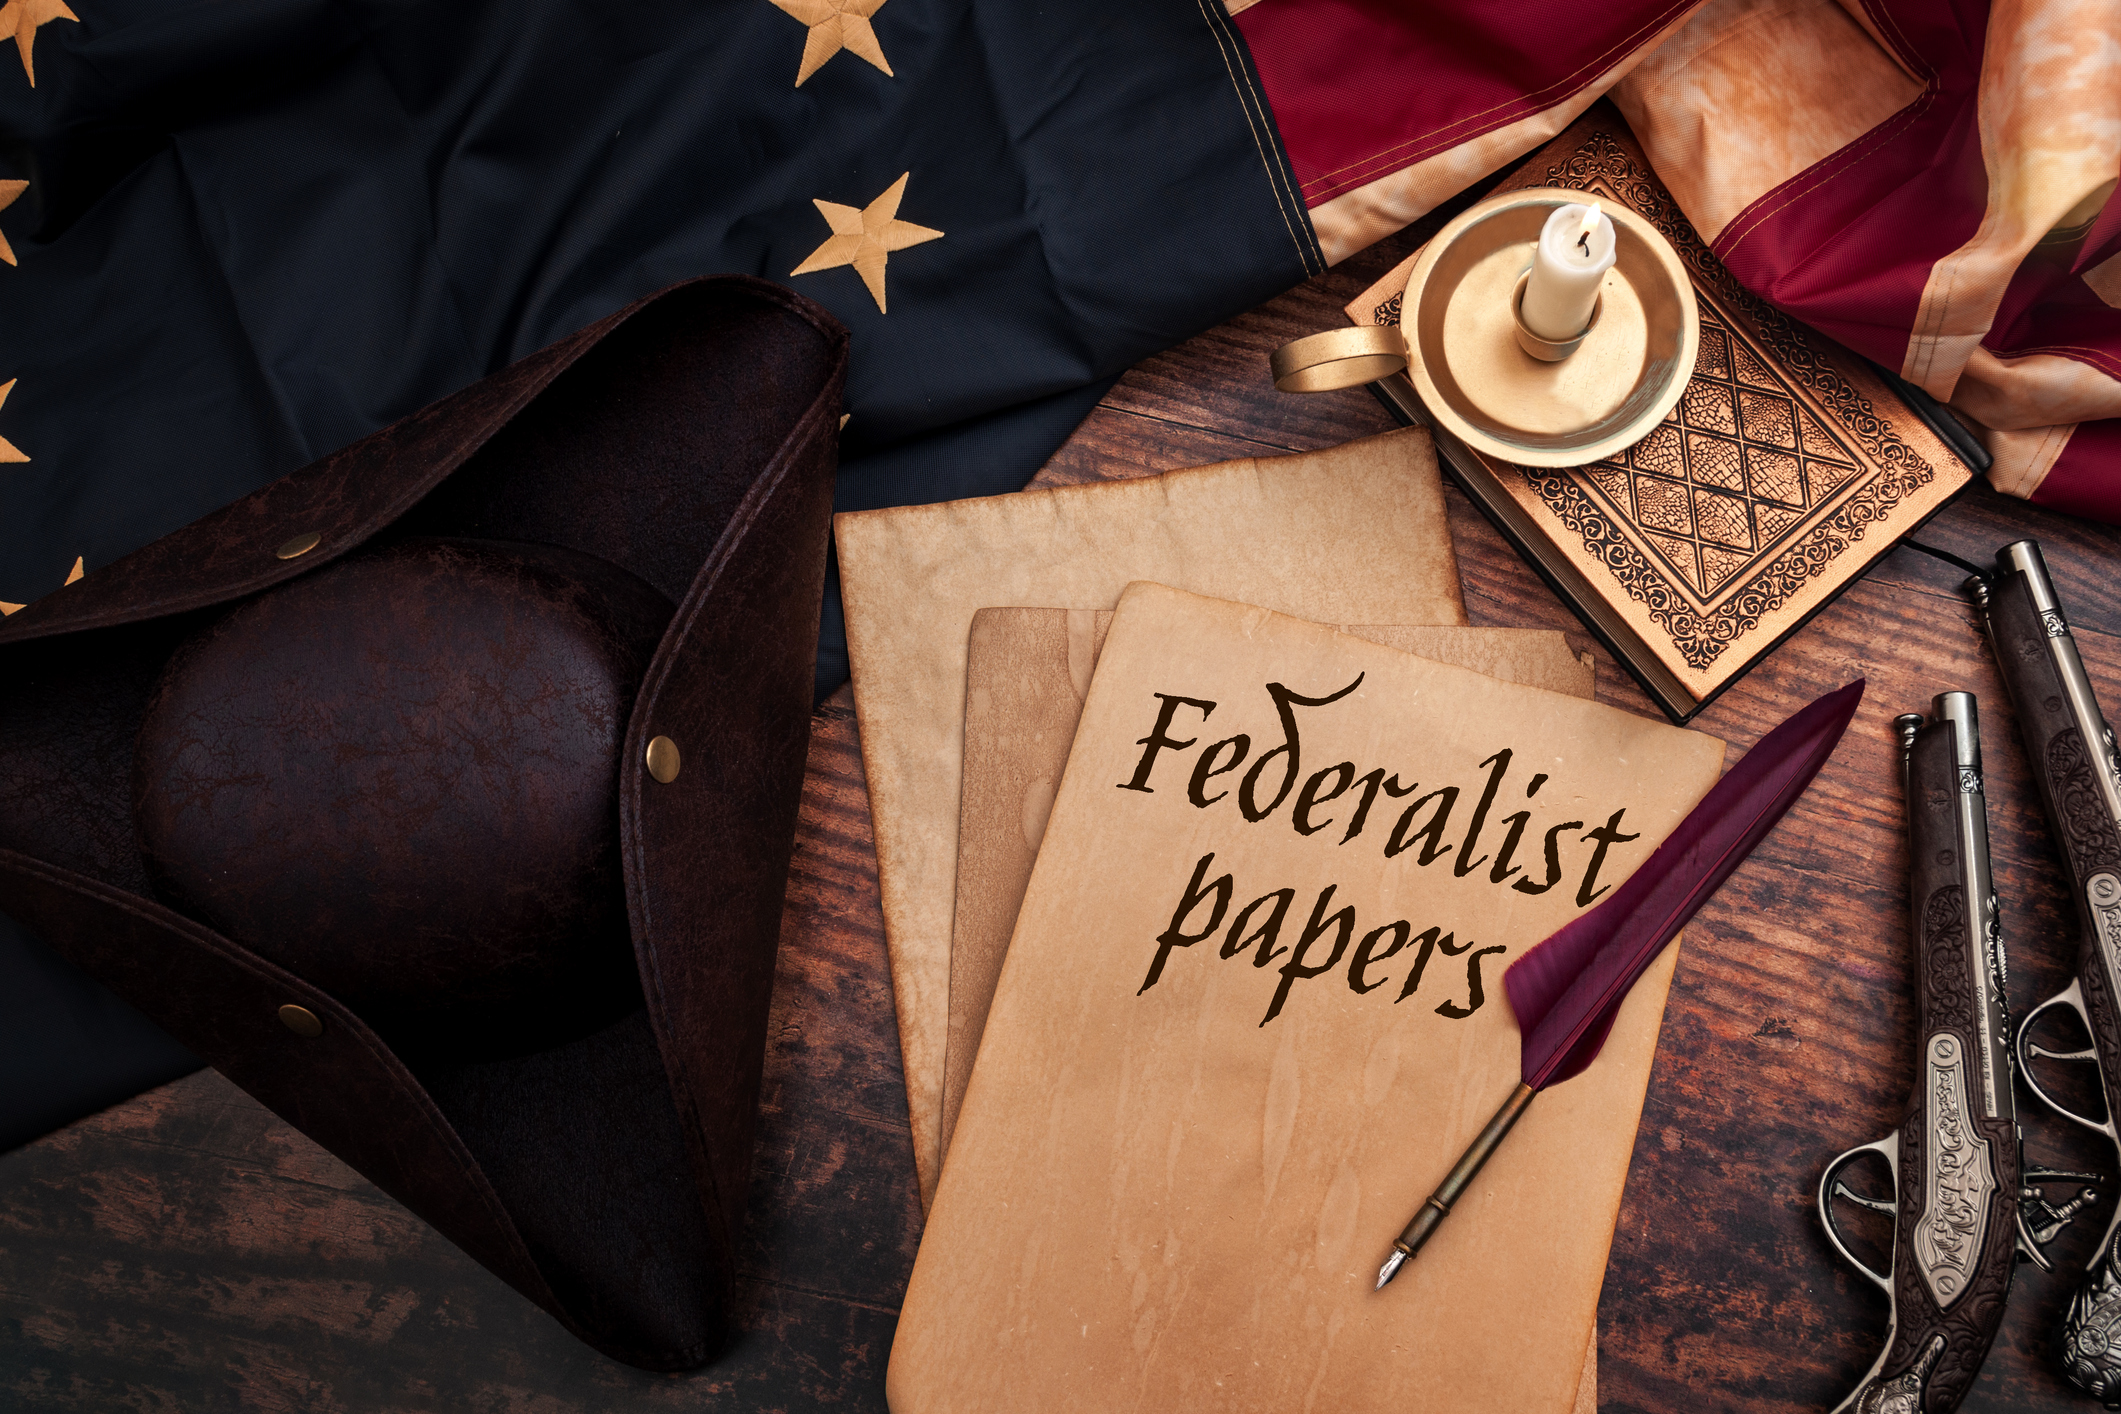 Federalist papers and the birth of the United States of America concept with tricorn hat, candle, feather quill, musket gun, the Betsy Ross American flag and aged paper